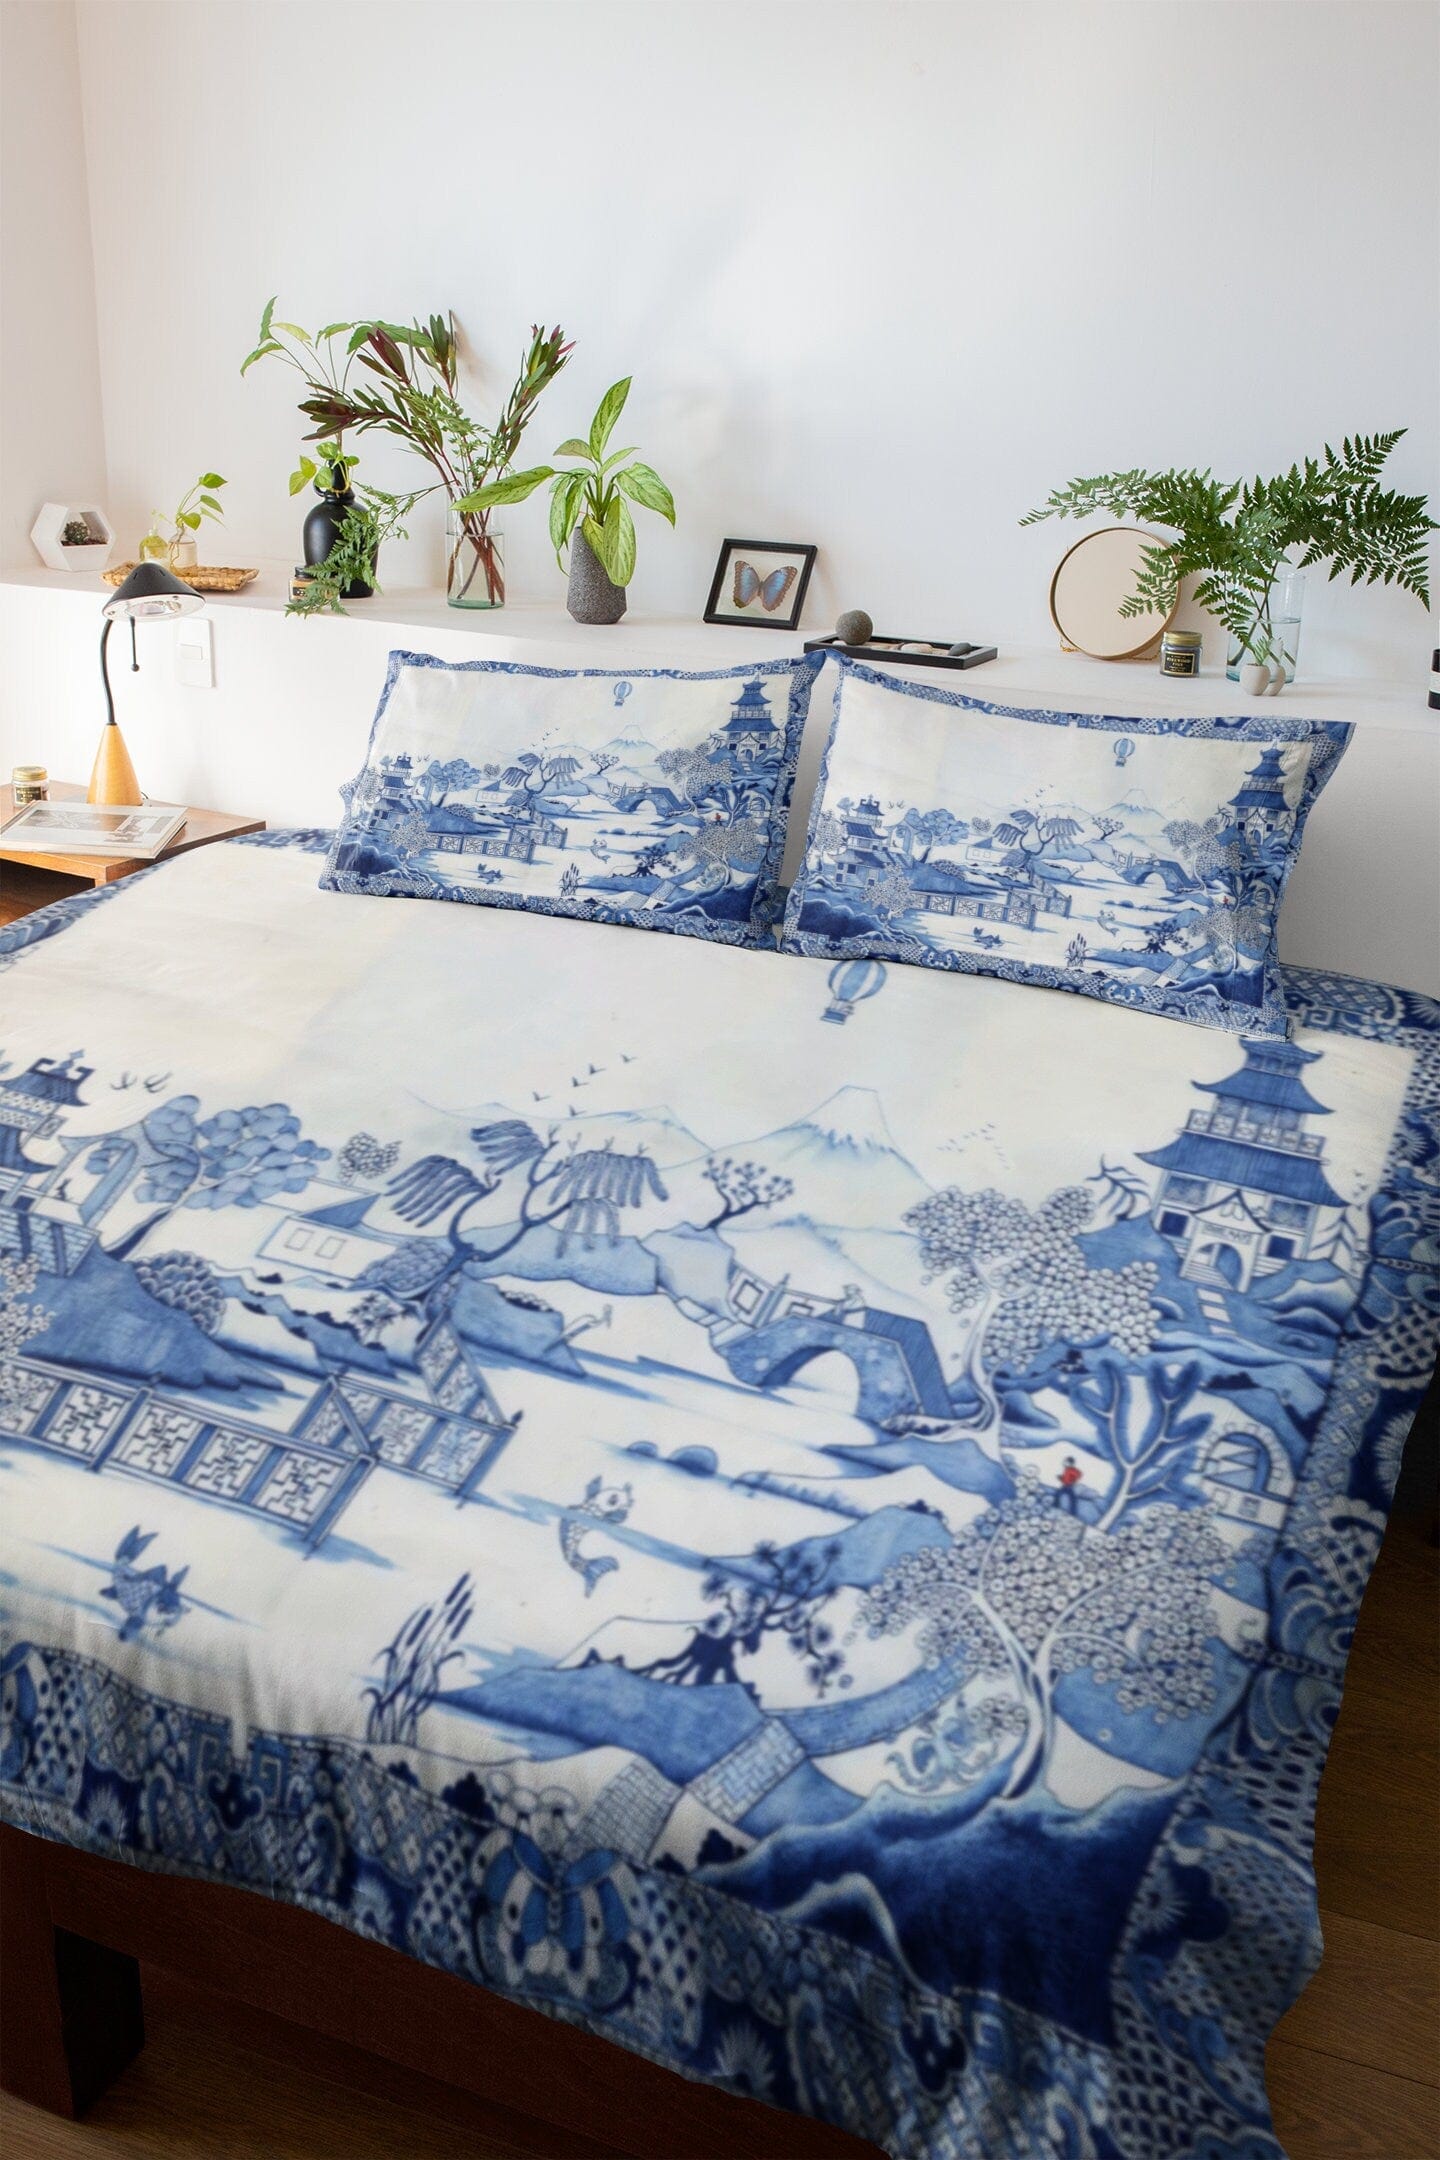 Kate McEnroe New York Pillow Sham in Chinoiserie Blue Willow, Chinoiserie Bedroom Pillows, Traditional Home Decor, Classic Style Bedroom Decor, Wedding Gifts Pillow Shams